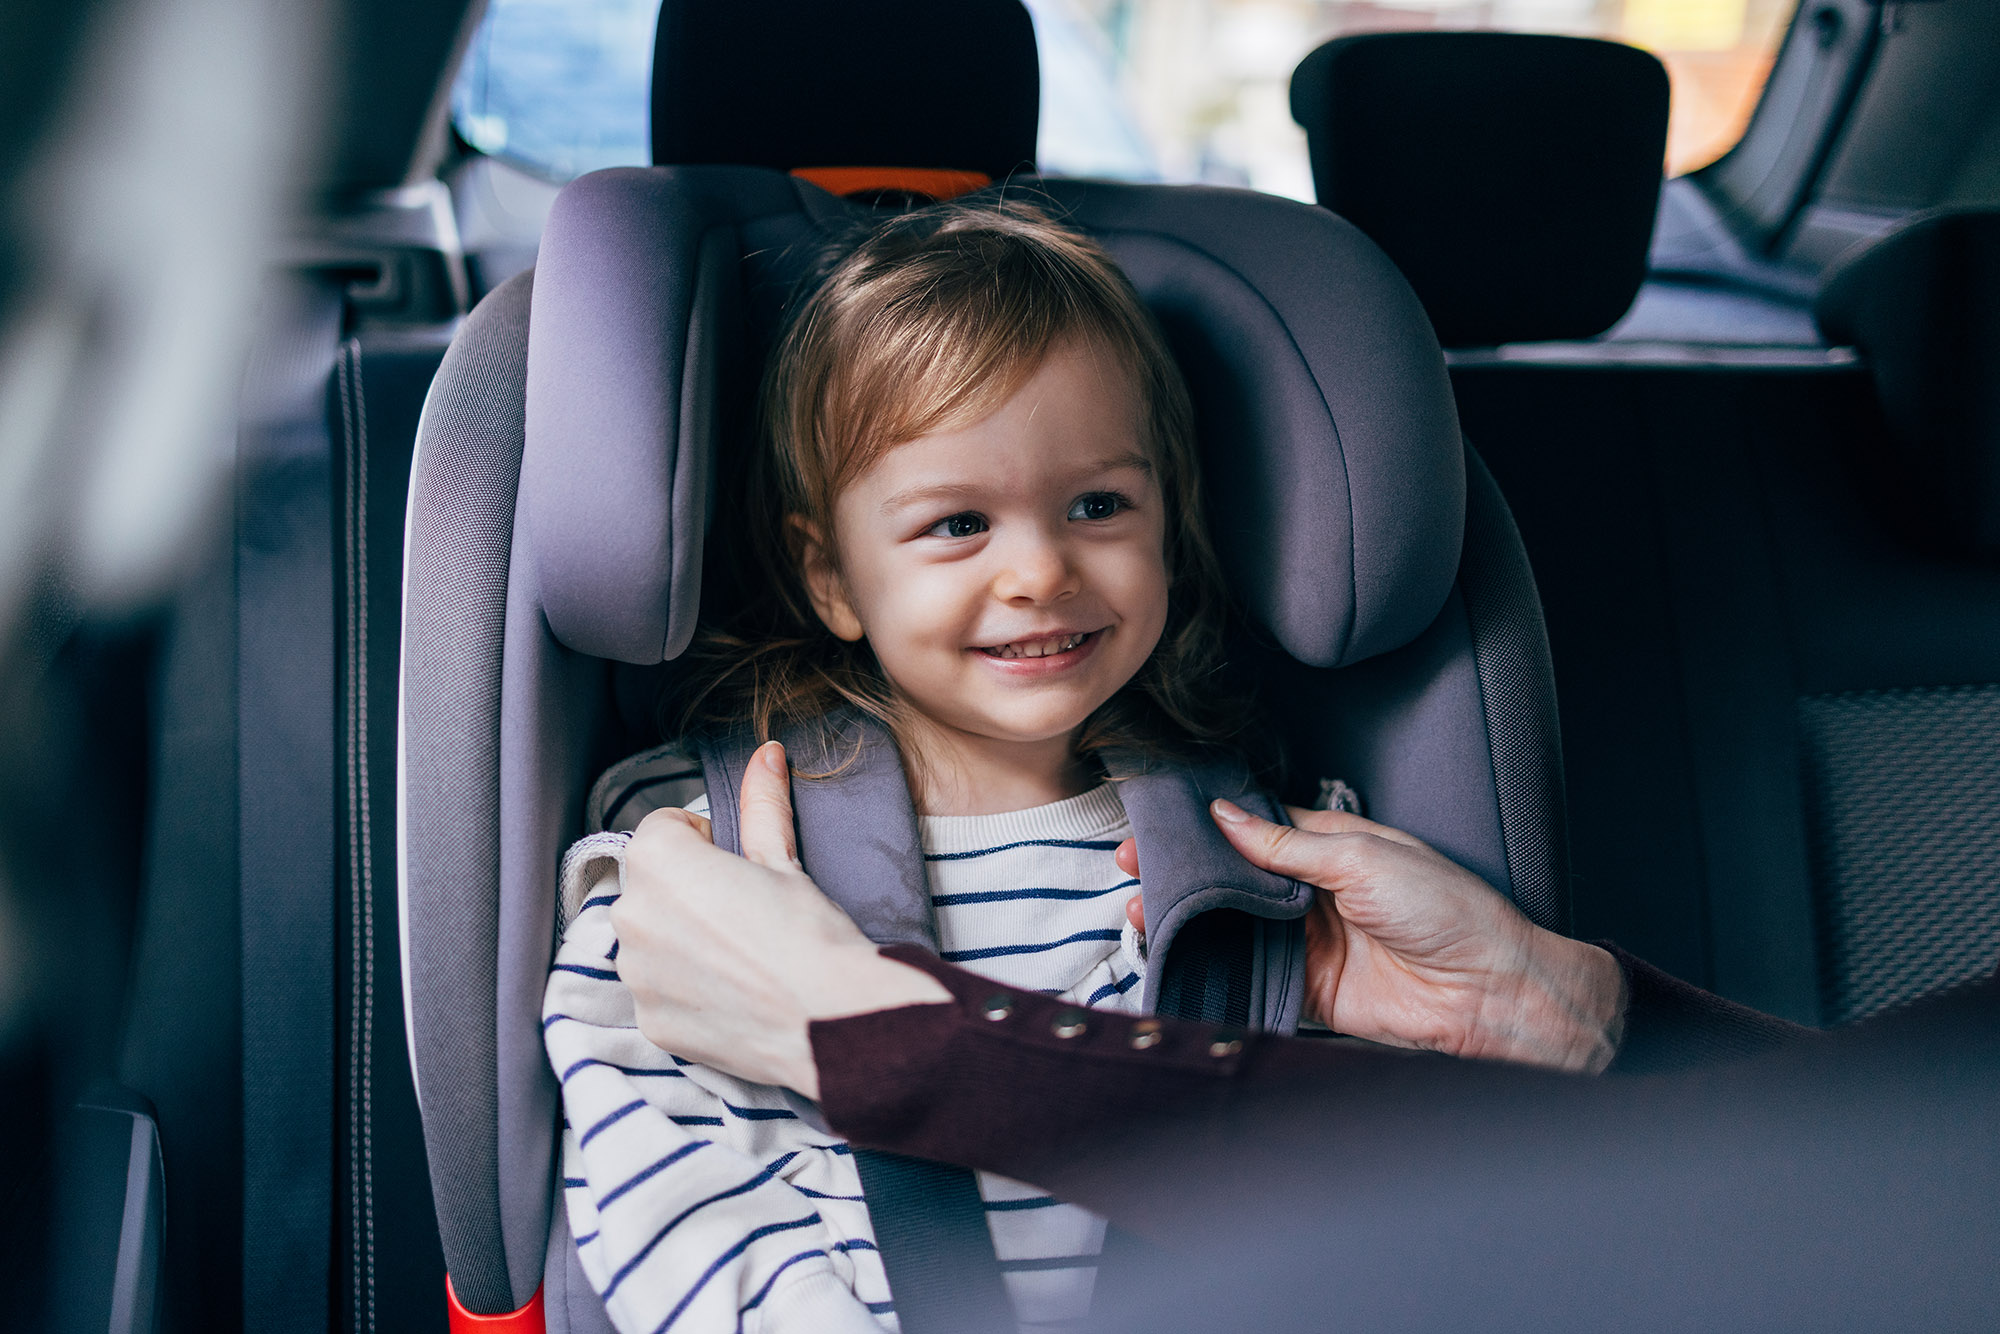 Person buckles smiling child into forward-facing car seat in the back of a vehicle.